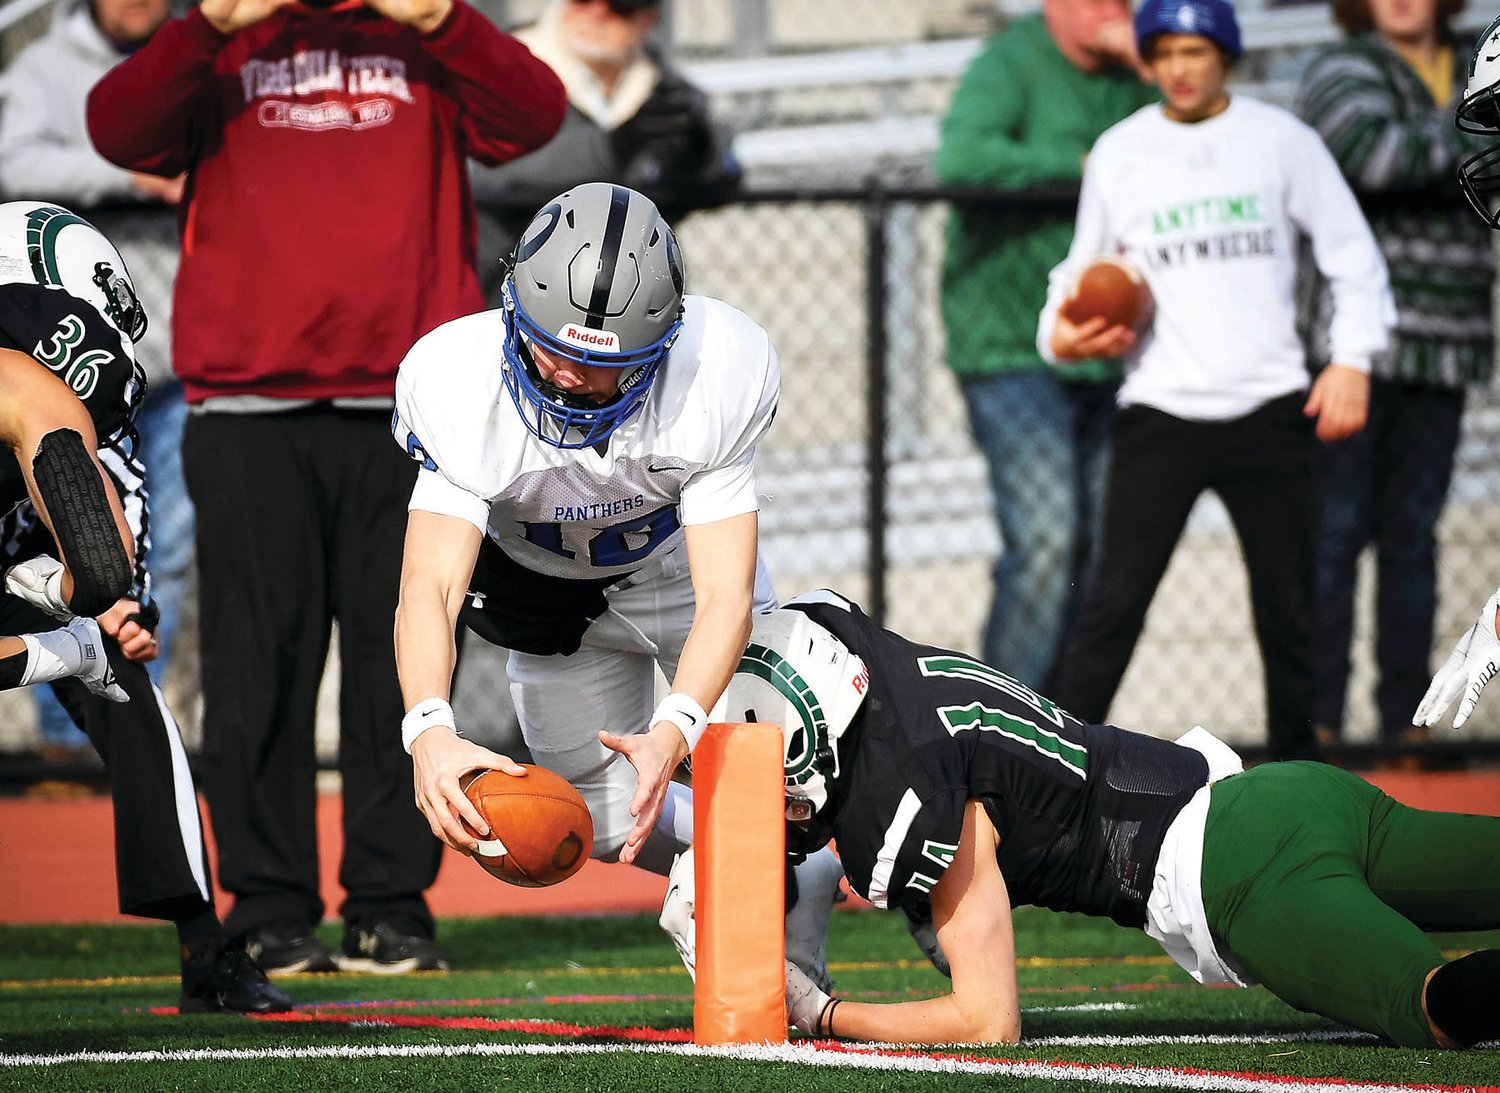 Quakertown’s Will Steich dives just short of the end zone, setting up the first score of the game by Tyler Woodman on a 1-yard run, making it 7-0.